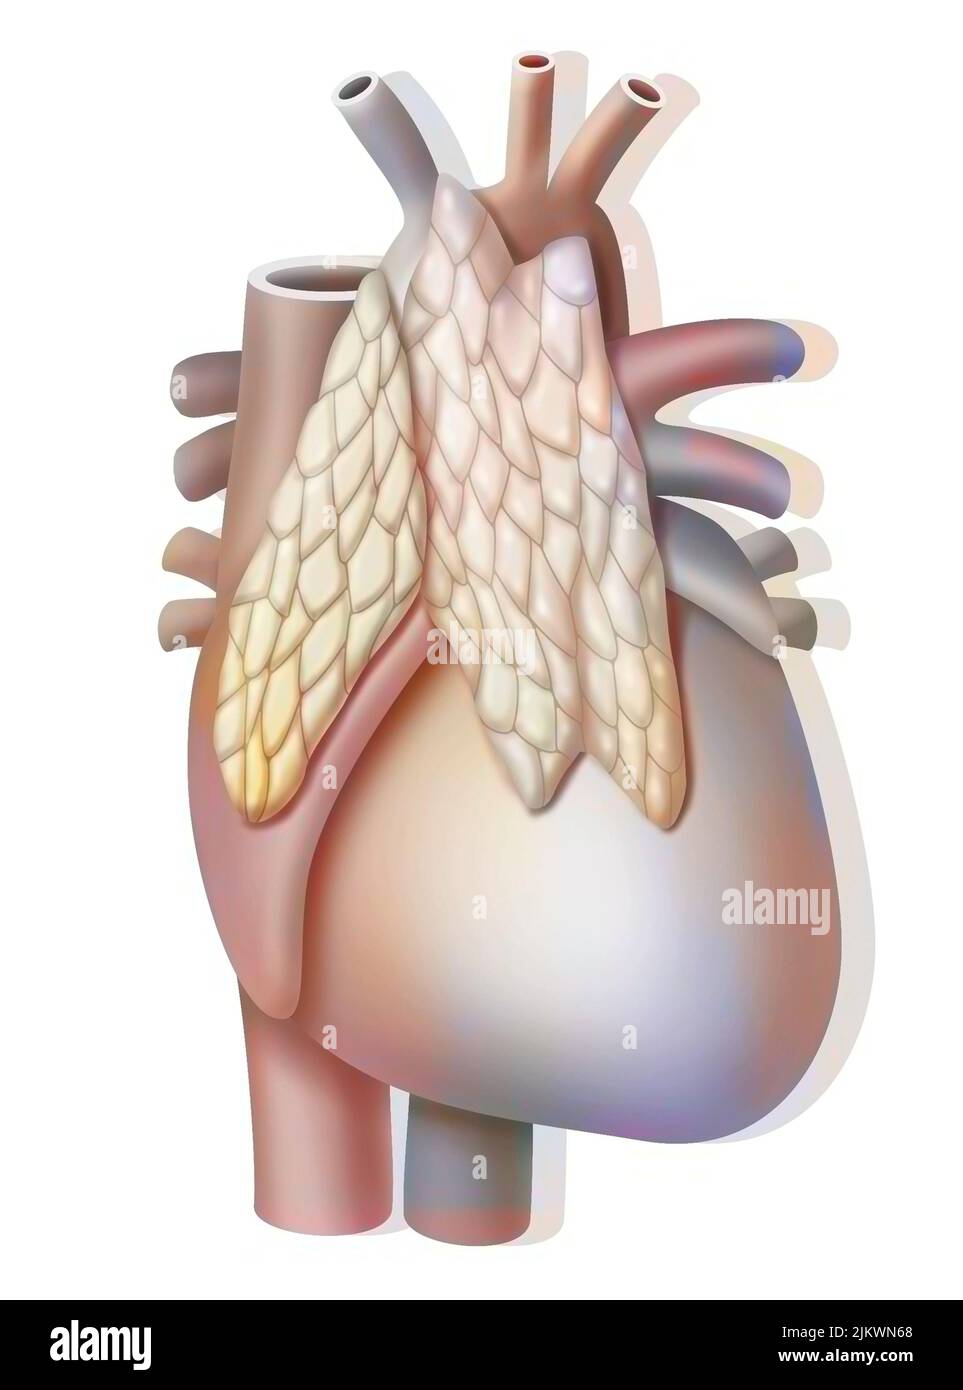 Thymus, endocrine gland located in front of the heart. Stock Photo